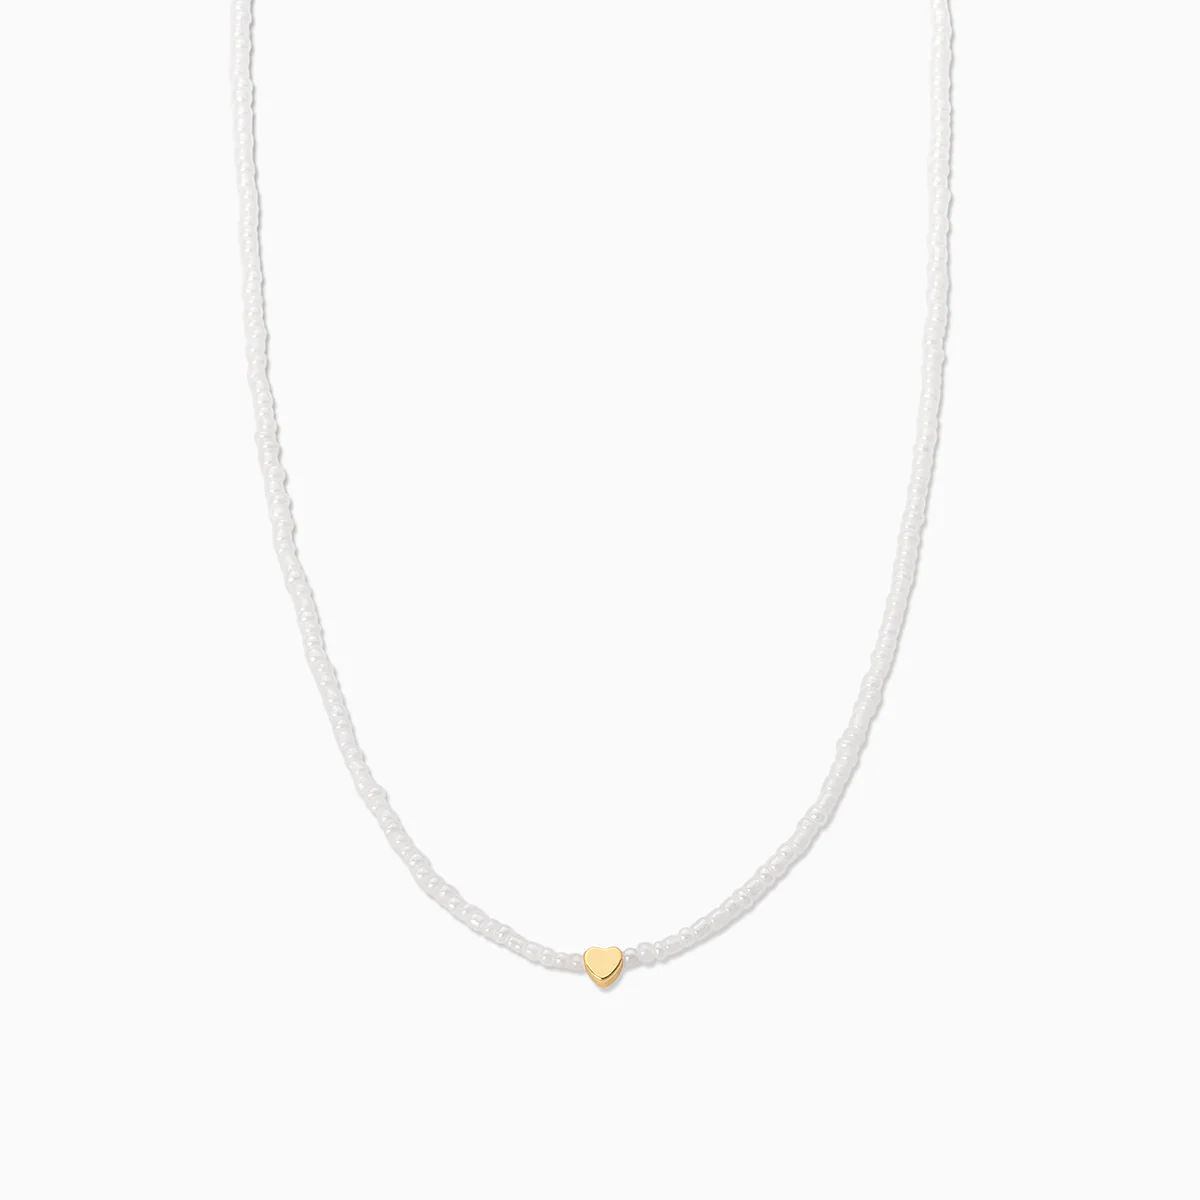 With Love Beaded Necklace | Uncommon James